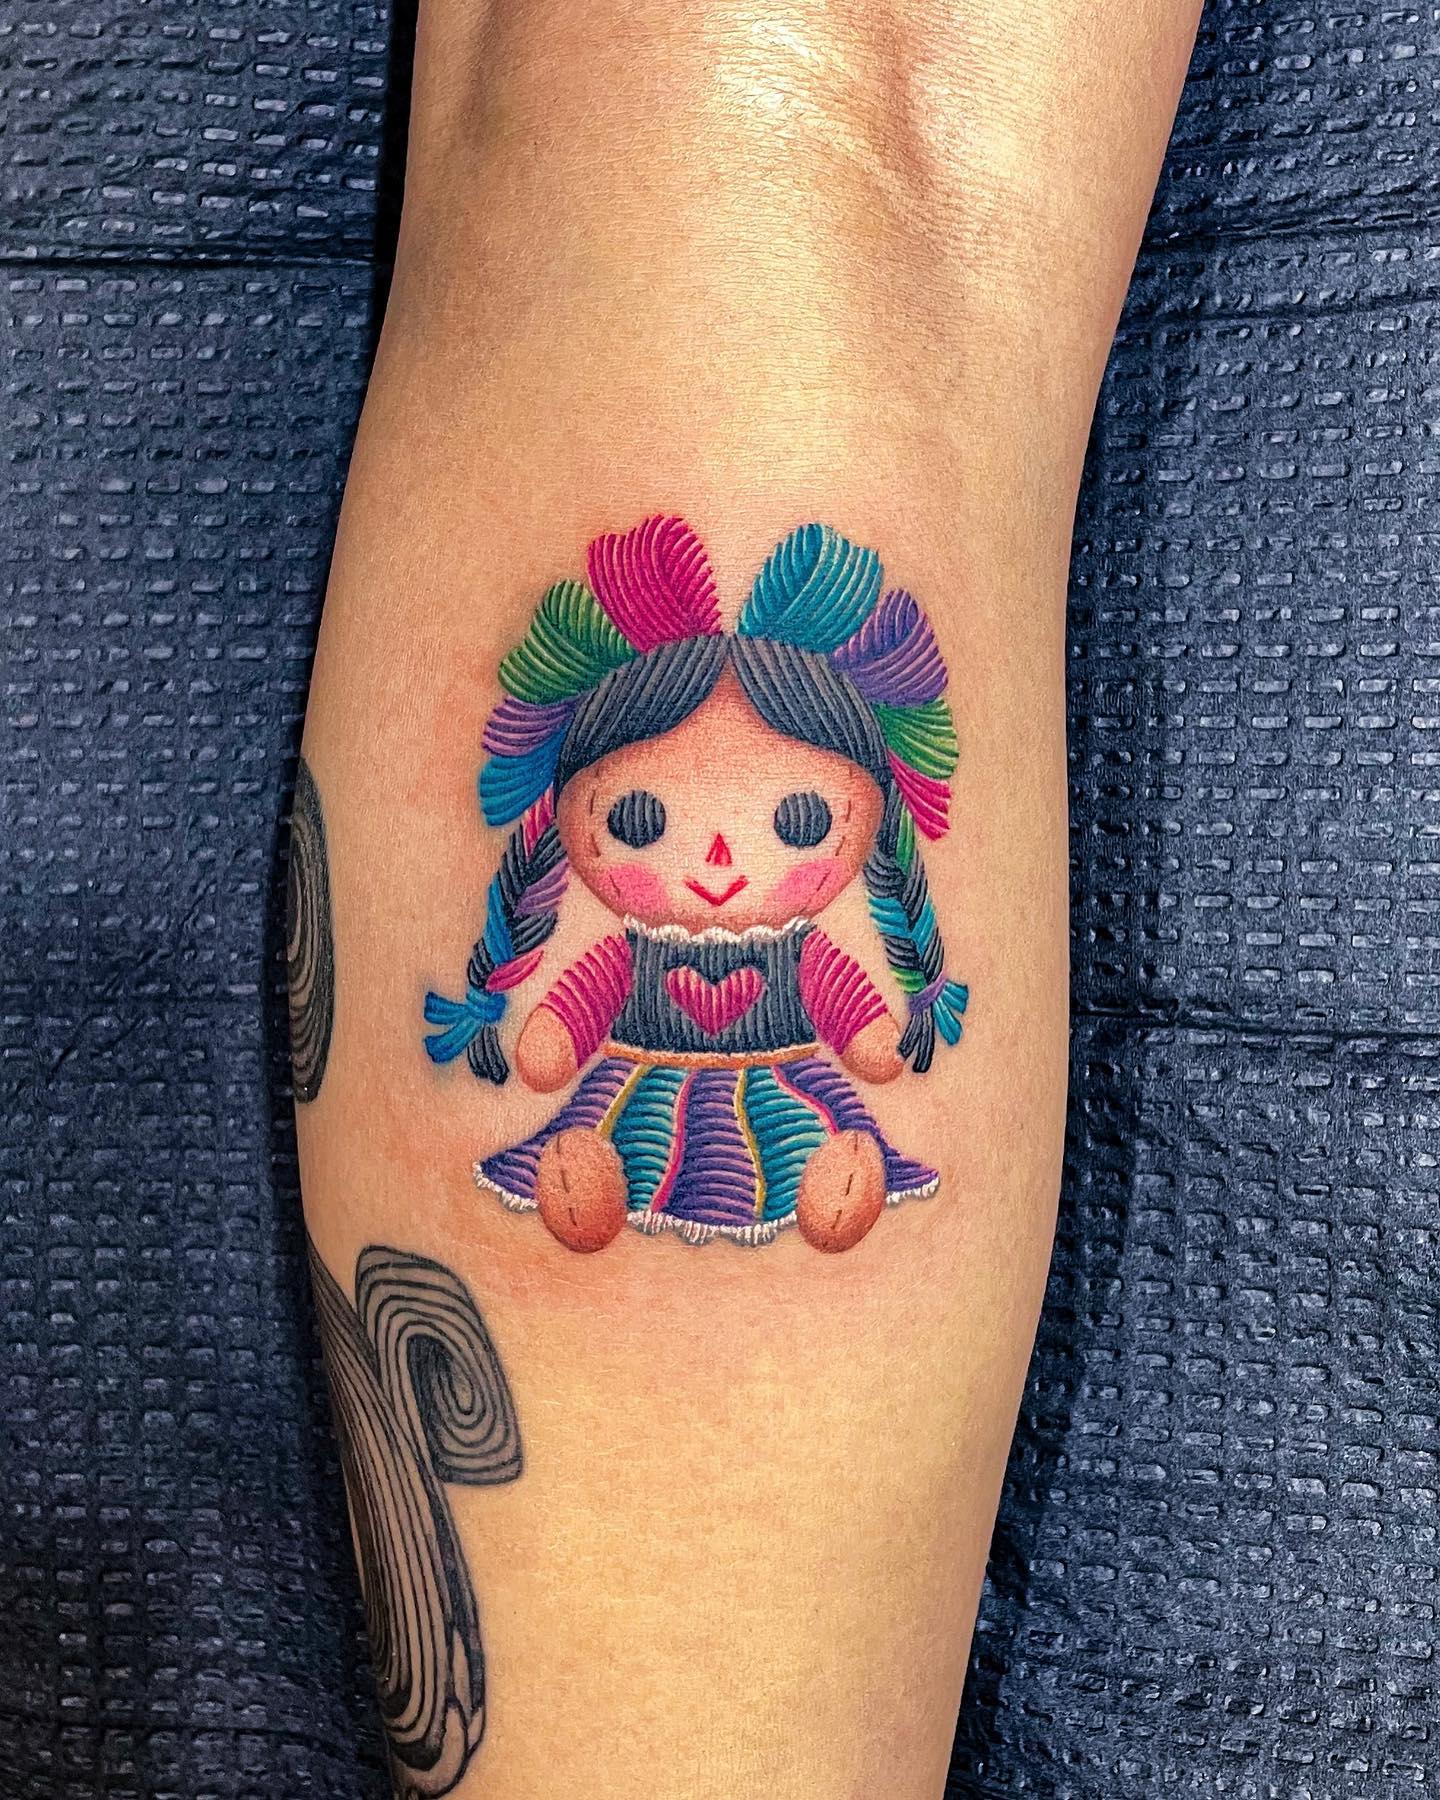 Lele doll Mexican embroidery tattoo